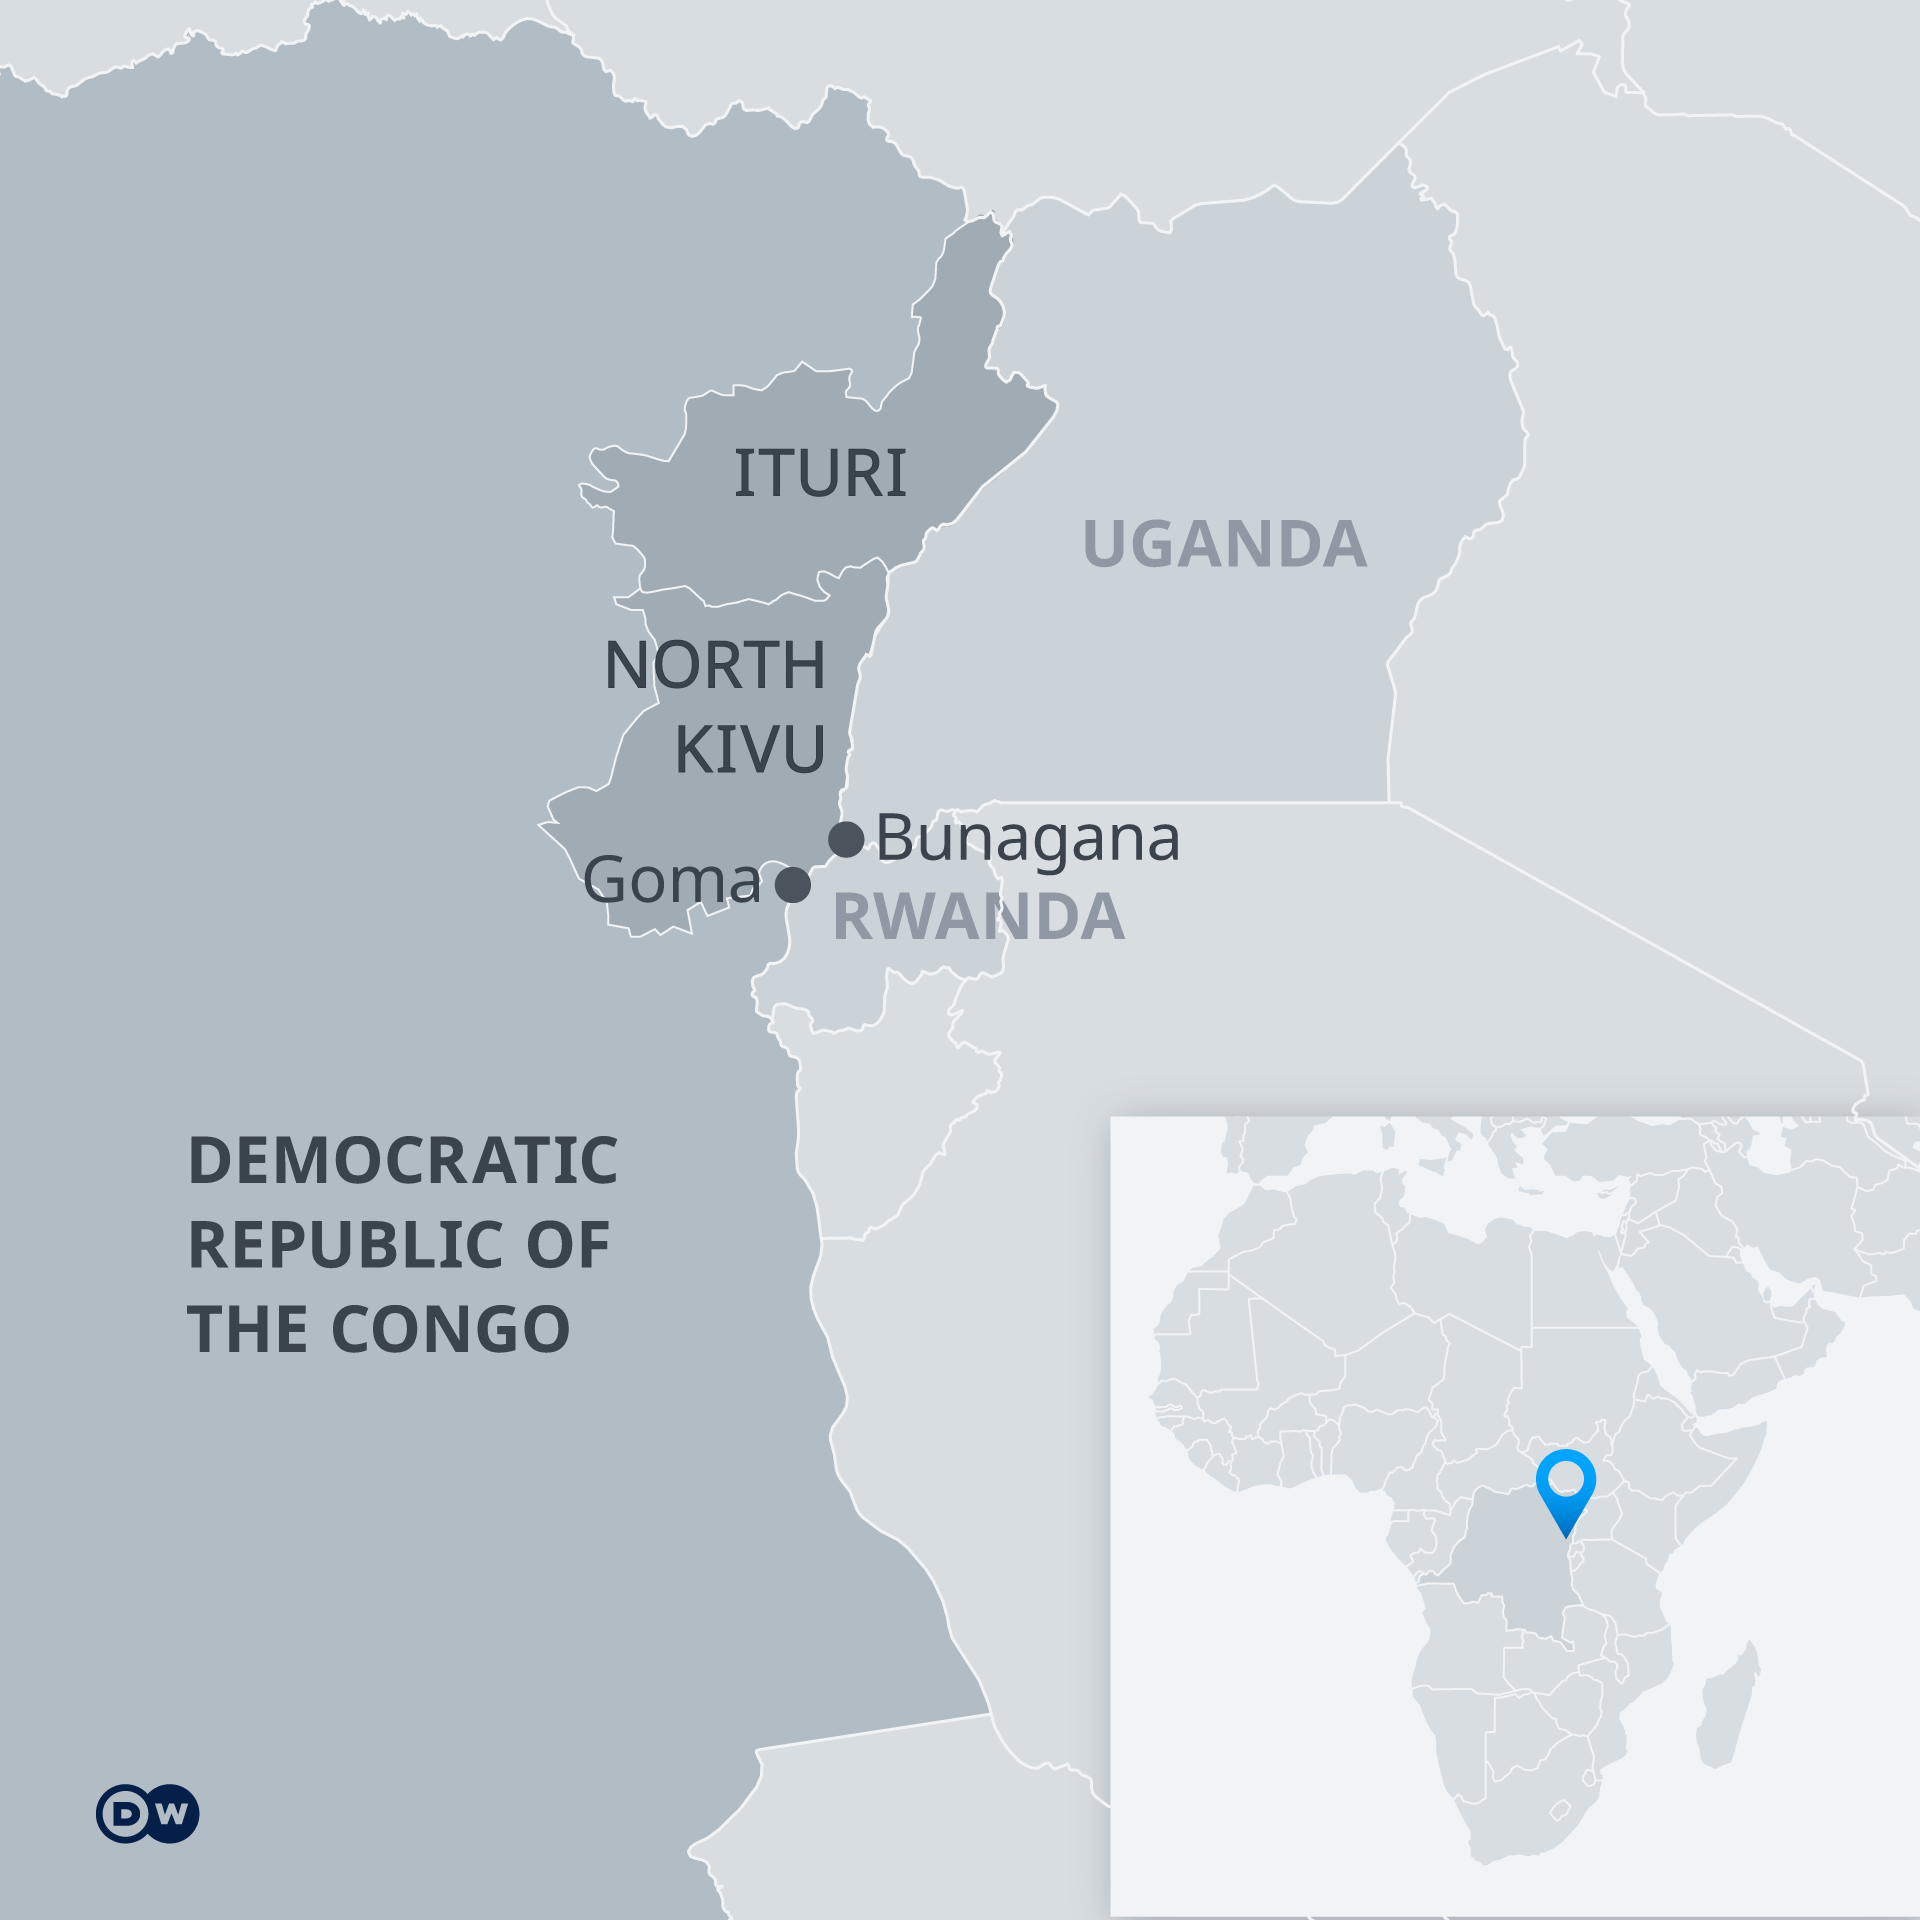 A map showing Congo and neighboring countries